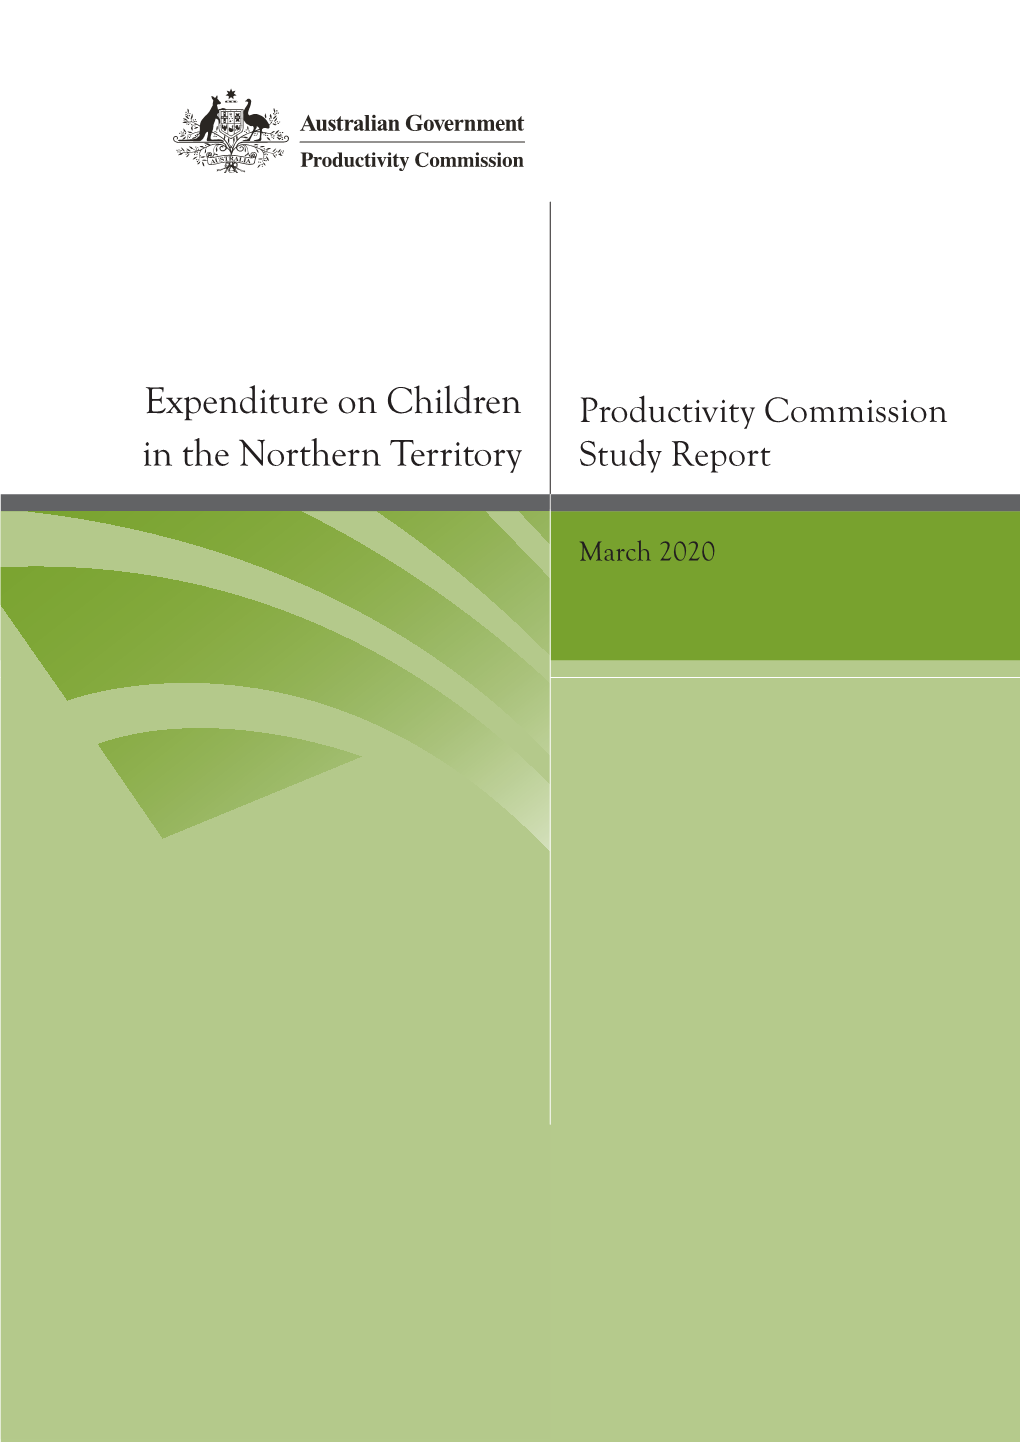 Expenditure on Children in the Northern Territory, Study Report